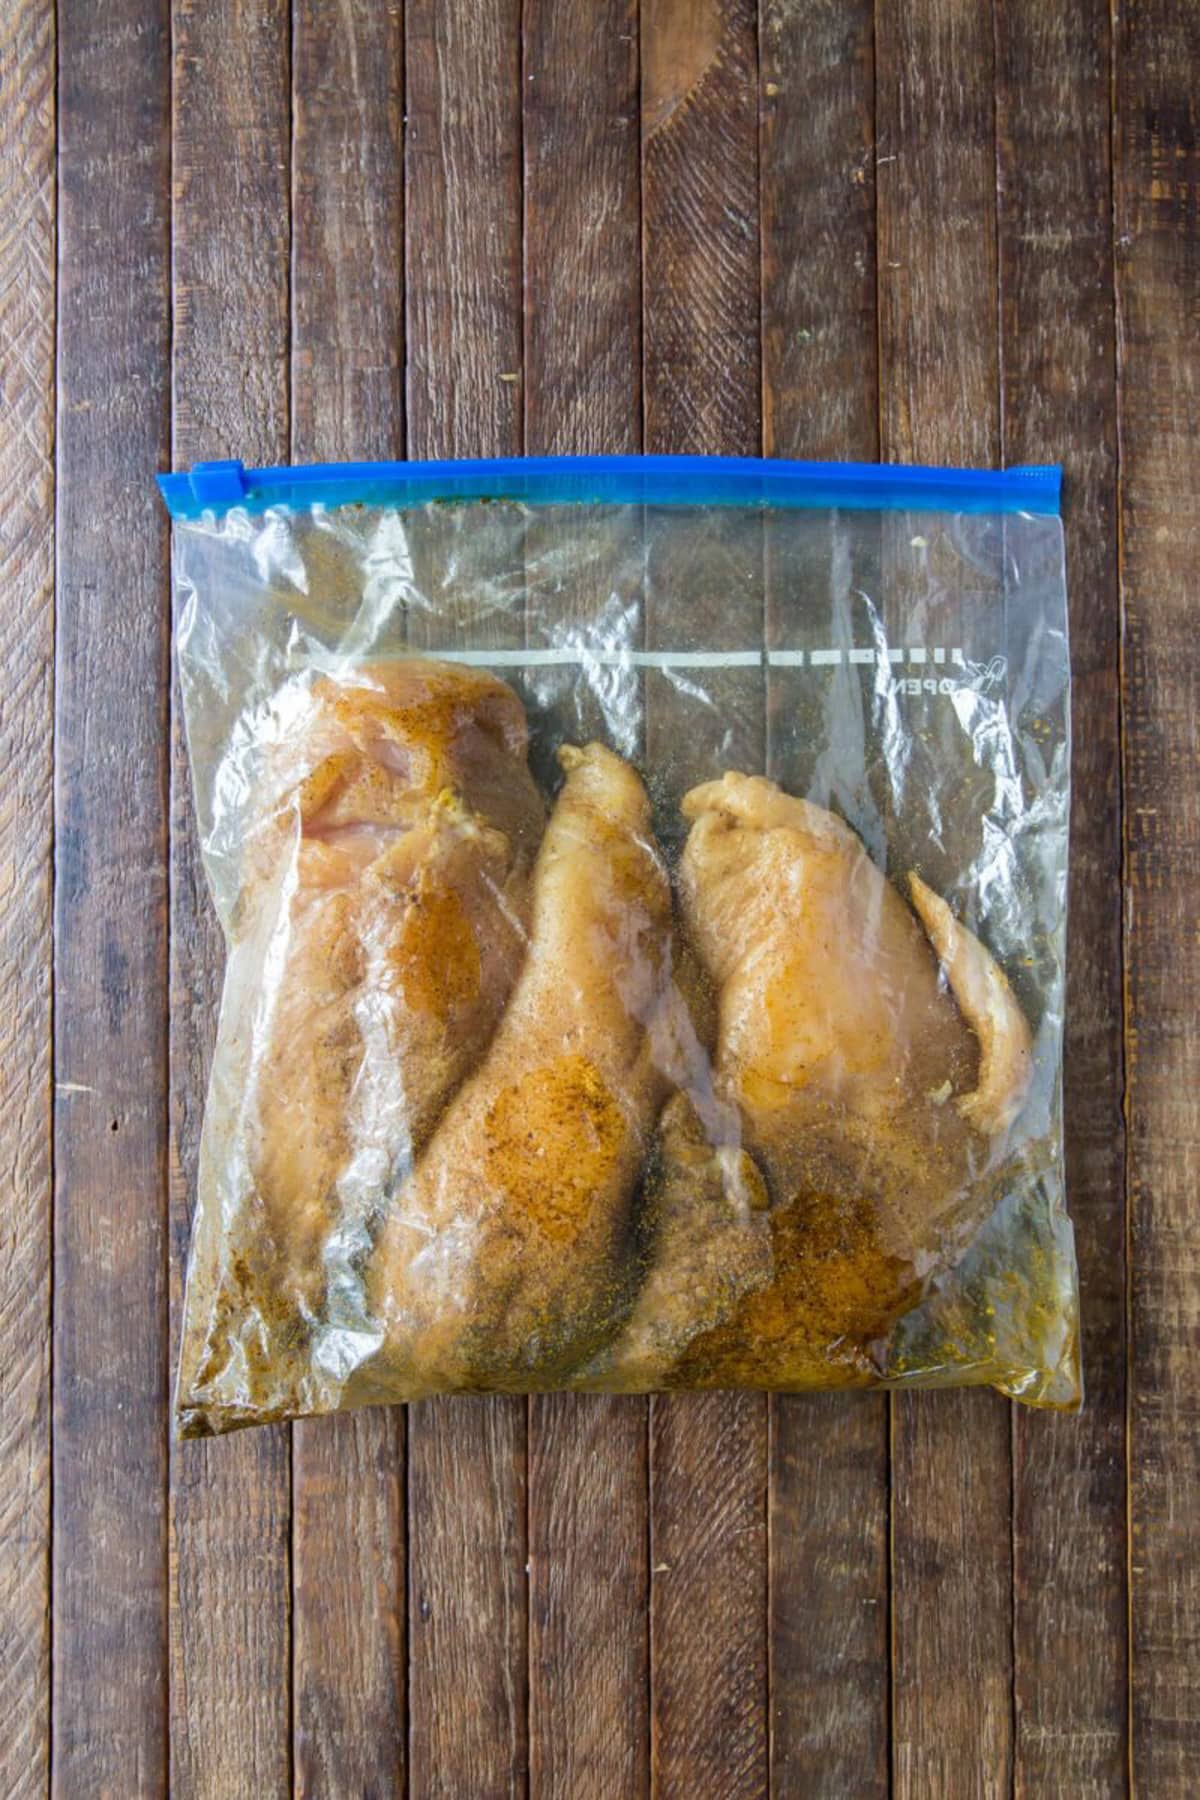 Chicken marinating in a bag on a table.